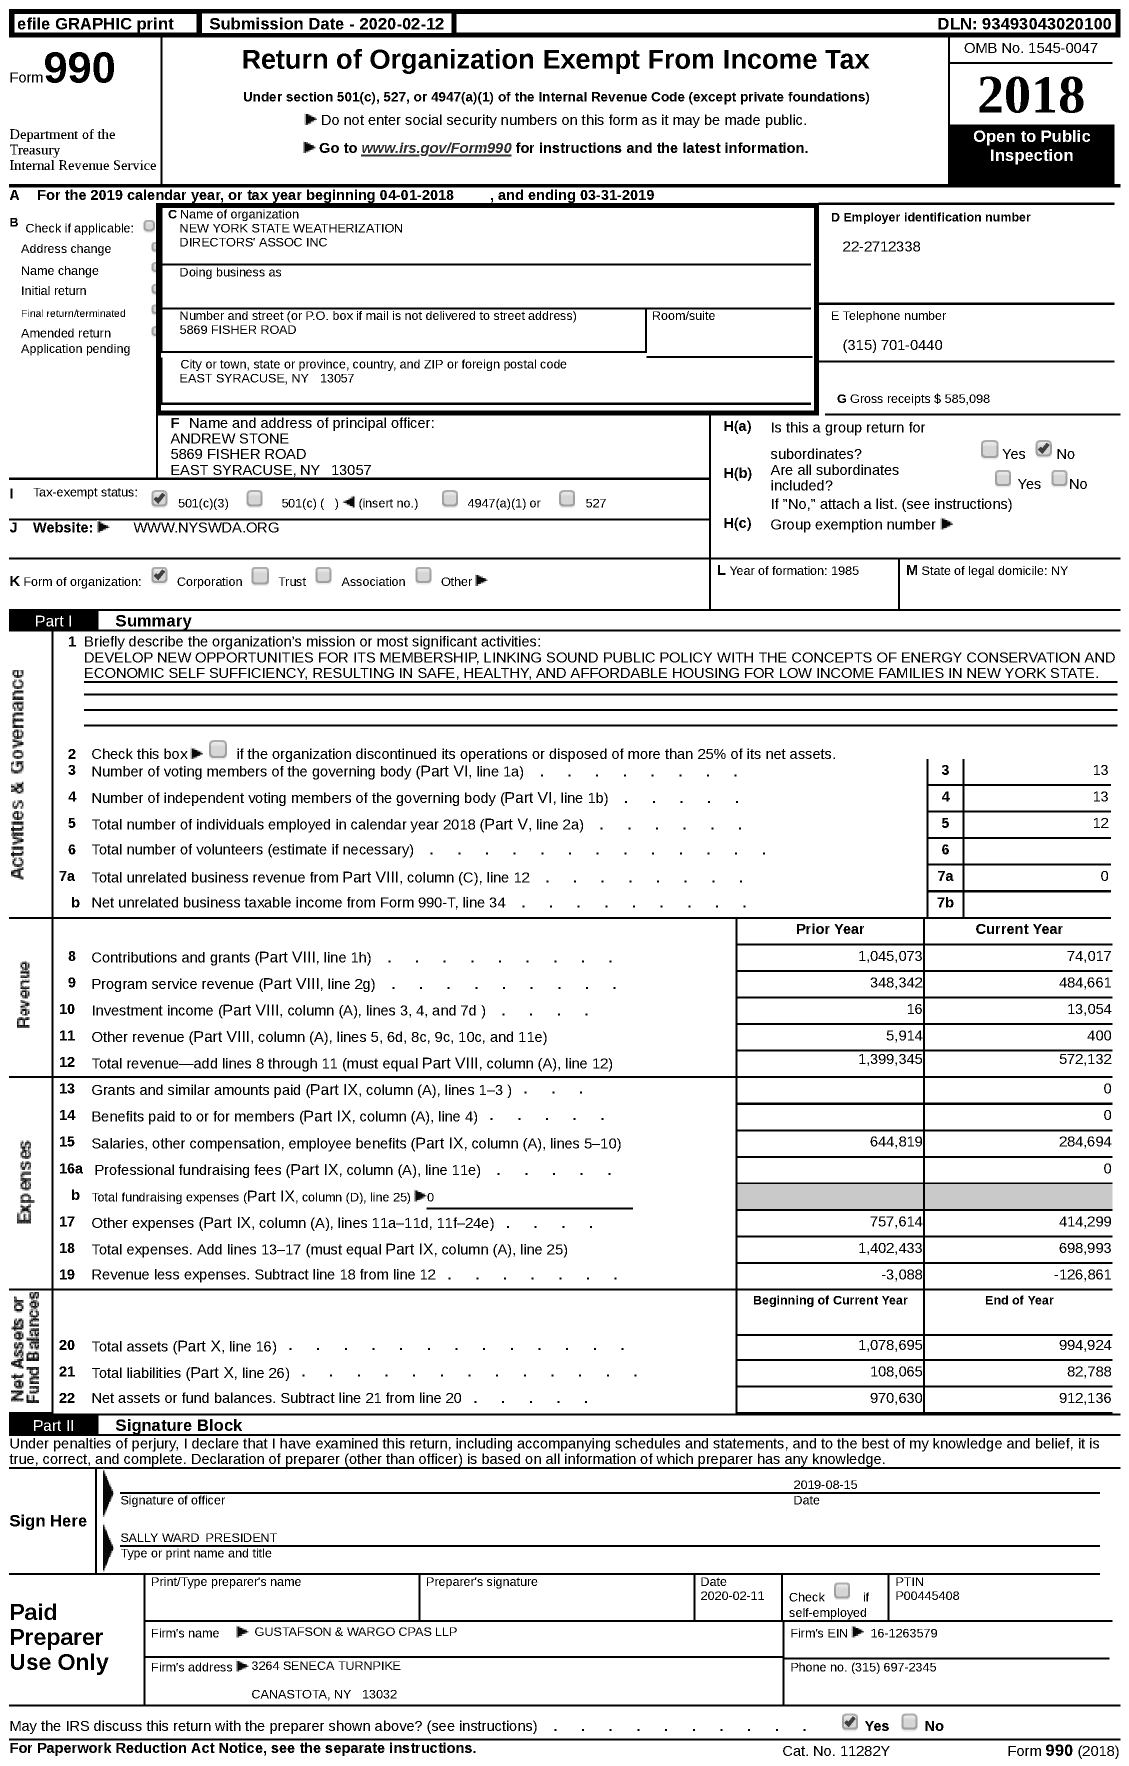 Image of first page of 2018 Form 990 for New York State Weatherization Directors' Association